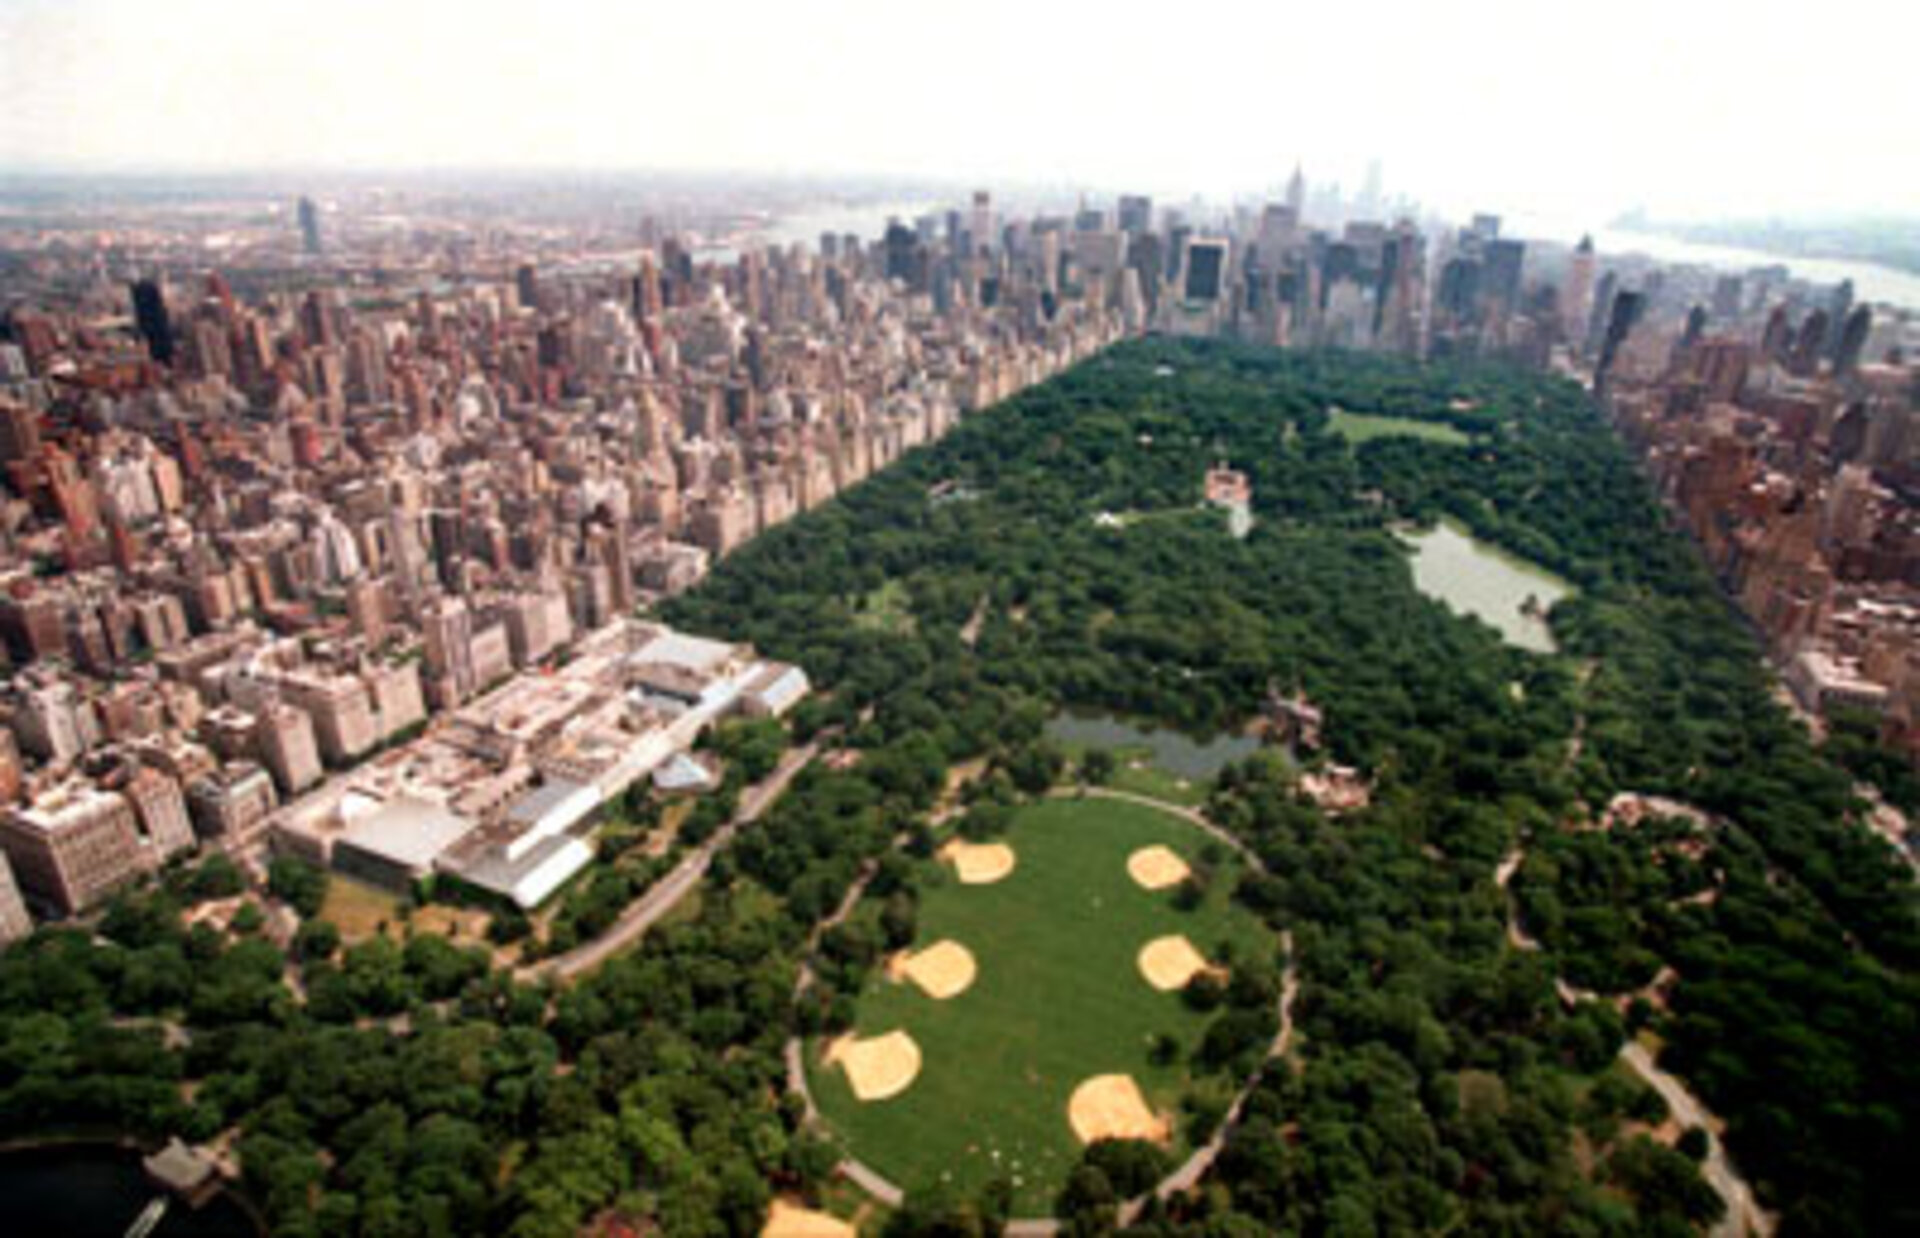 Looking south from Central Park